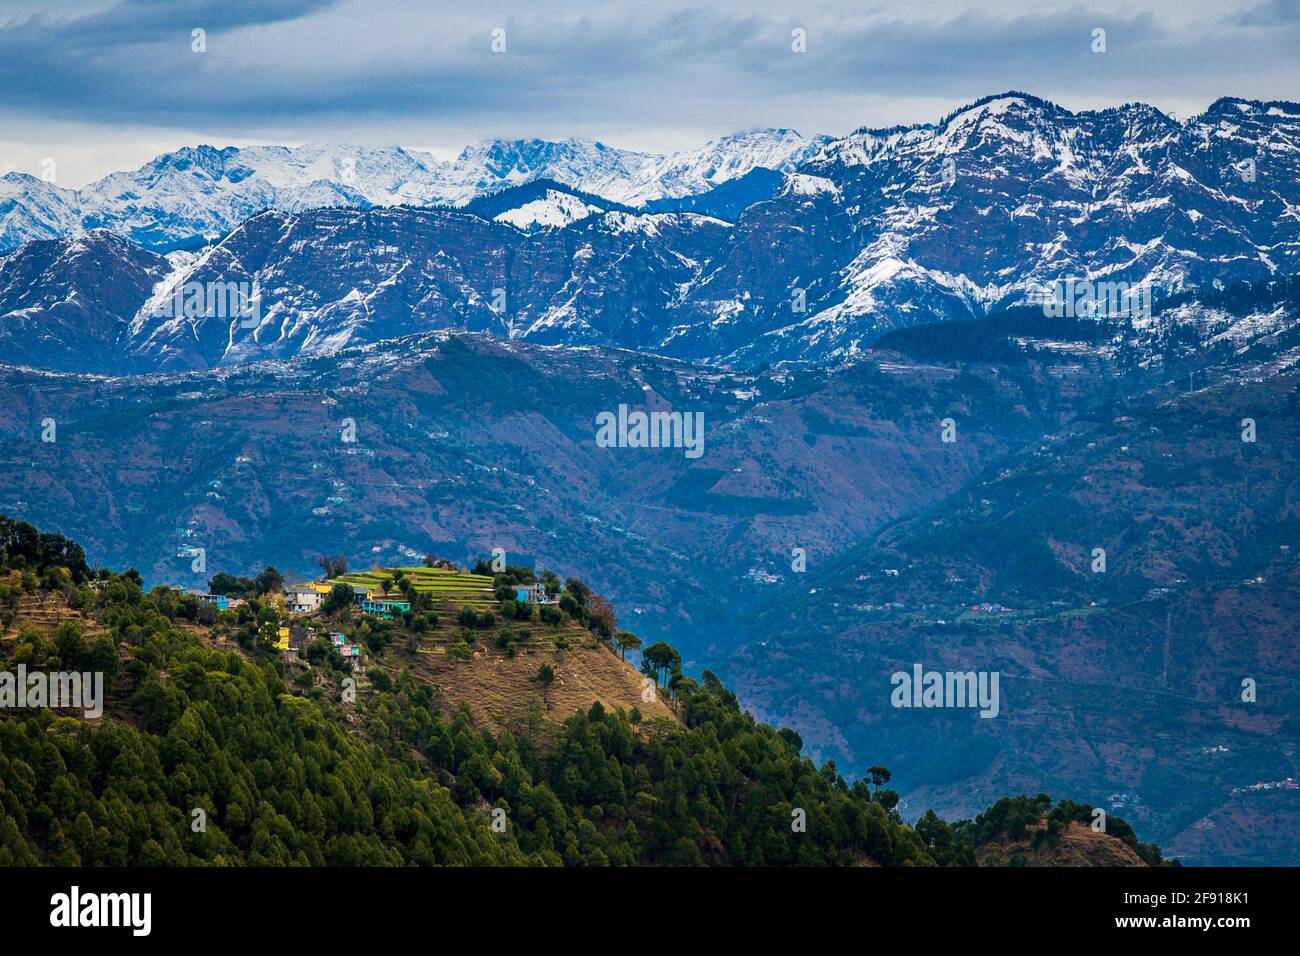 Snow patterns on farming fields in the Himalayan mountains on Trek to Dalhousie, Himachal Pradesh. Colourful, vibrant Landscape. Stock Photo